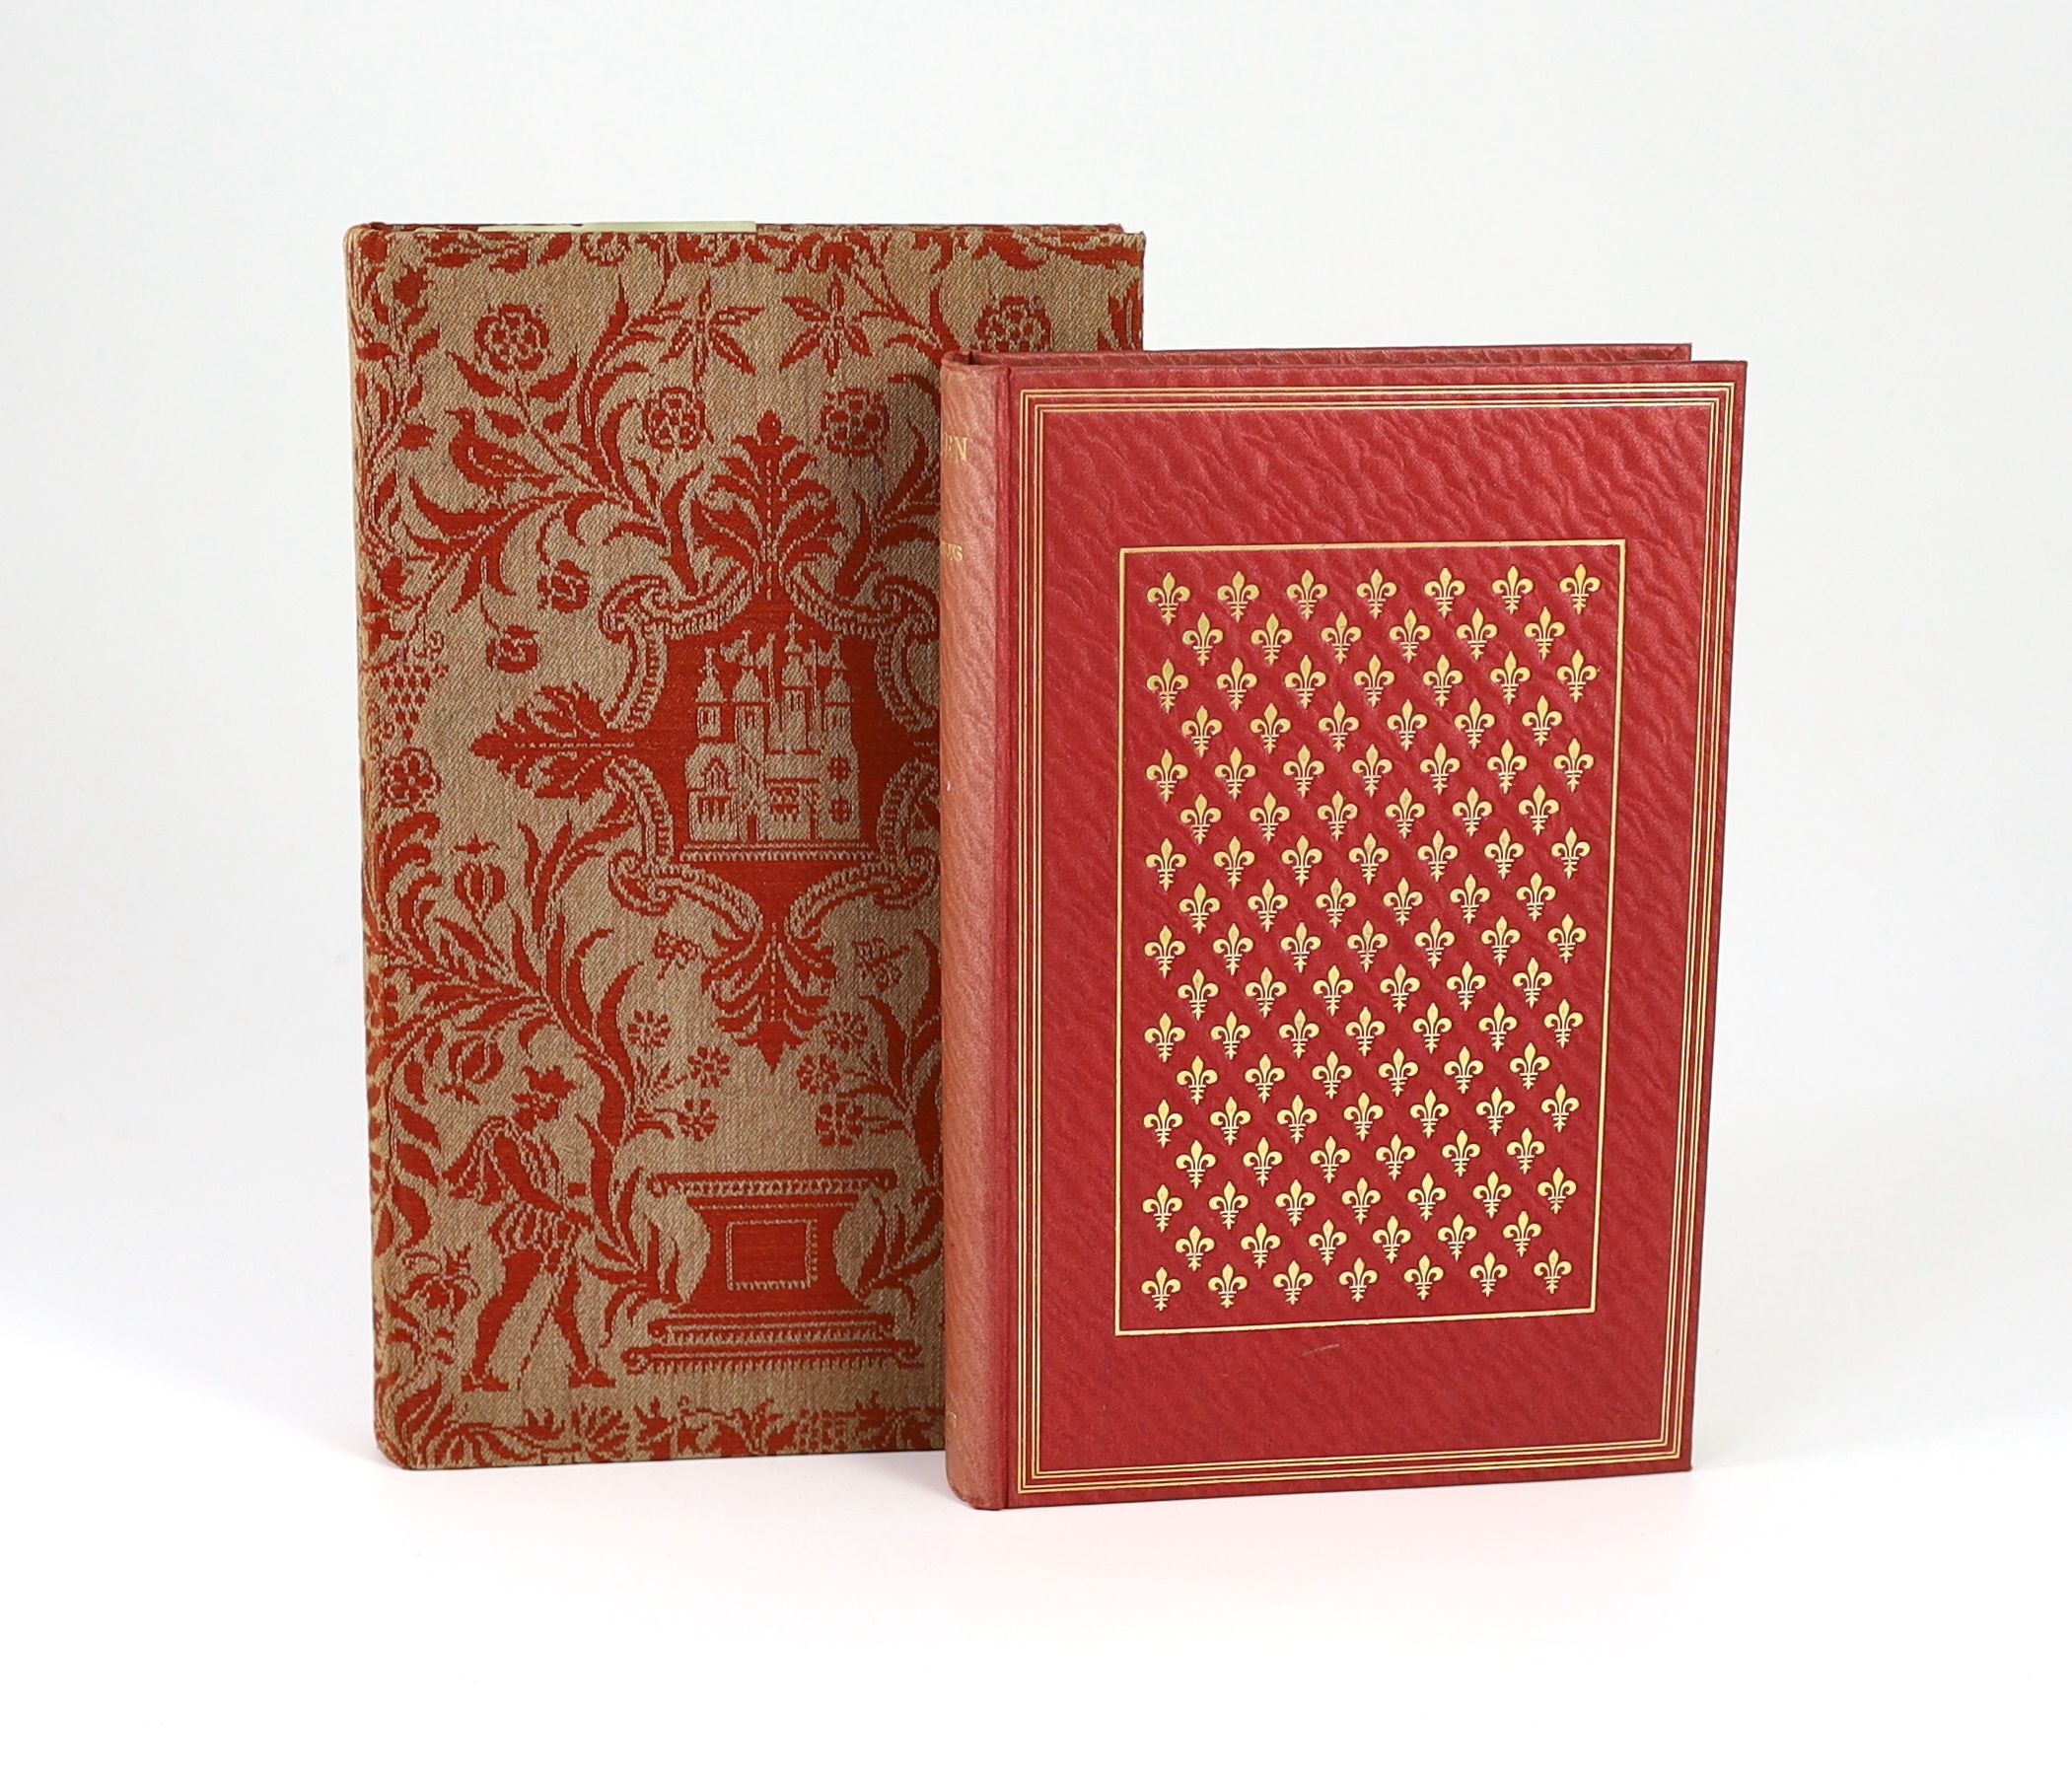 Nonesuch Press - Herbert, George - The Temple, one of 1500, 8vo, red brocade over boards, 1927; Salomons, Vera - Charles Eisen, one of 100, 8vo, original red paper covered boards, gilt-stamped pattern of fleur-de-lys, Jo